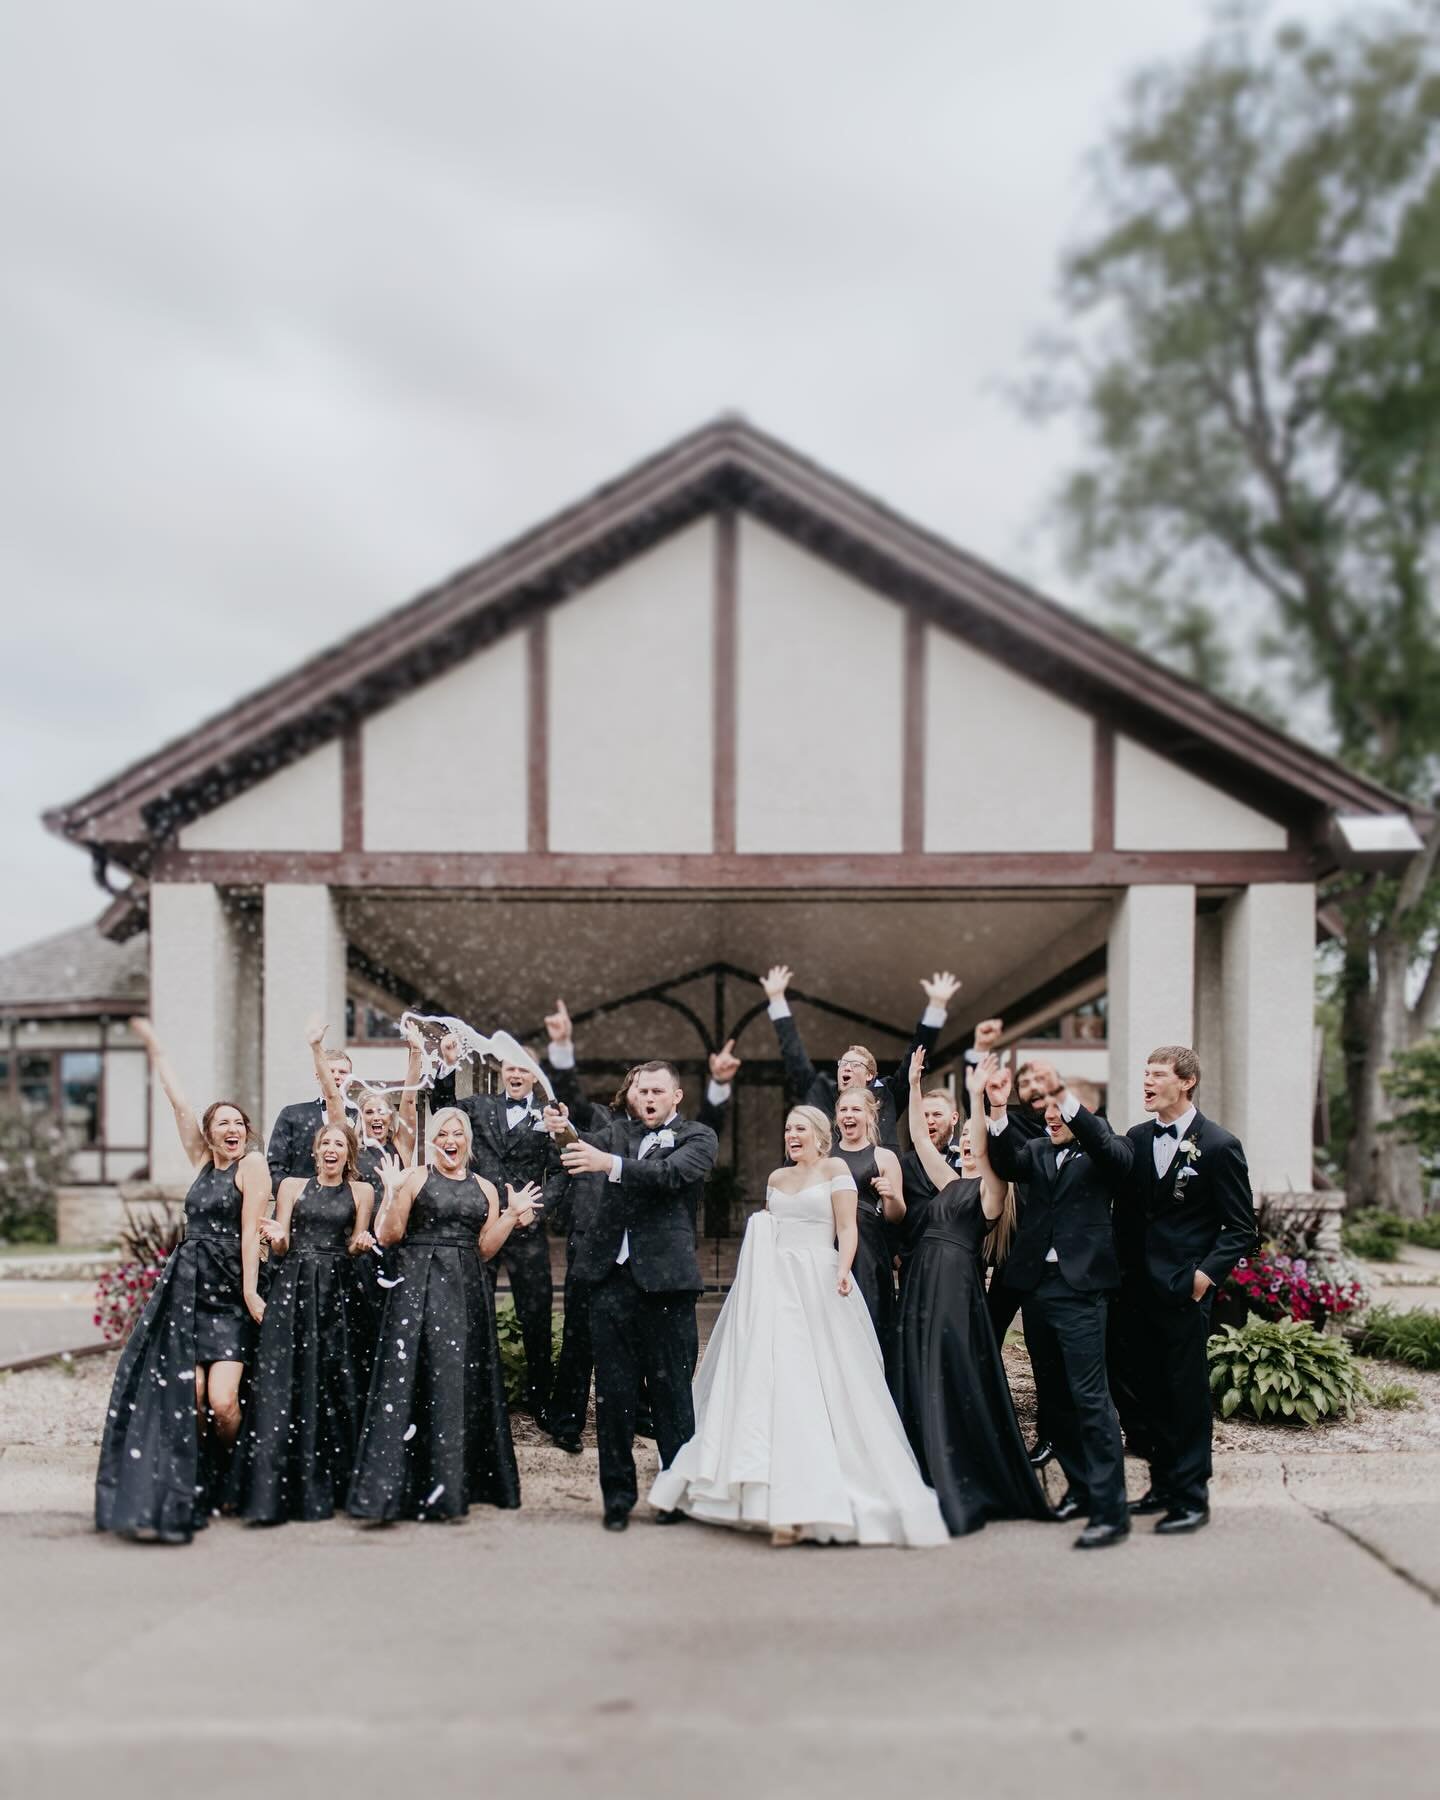 Ready for a great year of weddings and celebrations 🥂 🍾 📸

Also how fuckin classy is an all black wedding party?? 🖤🔥